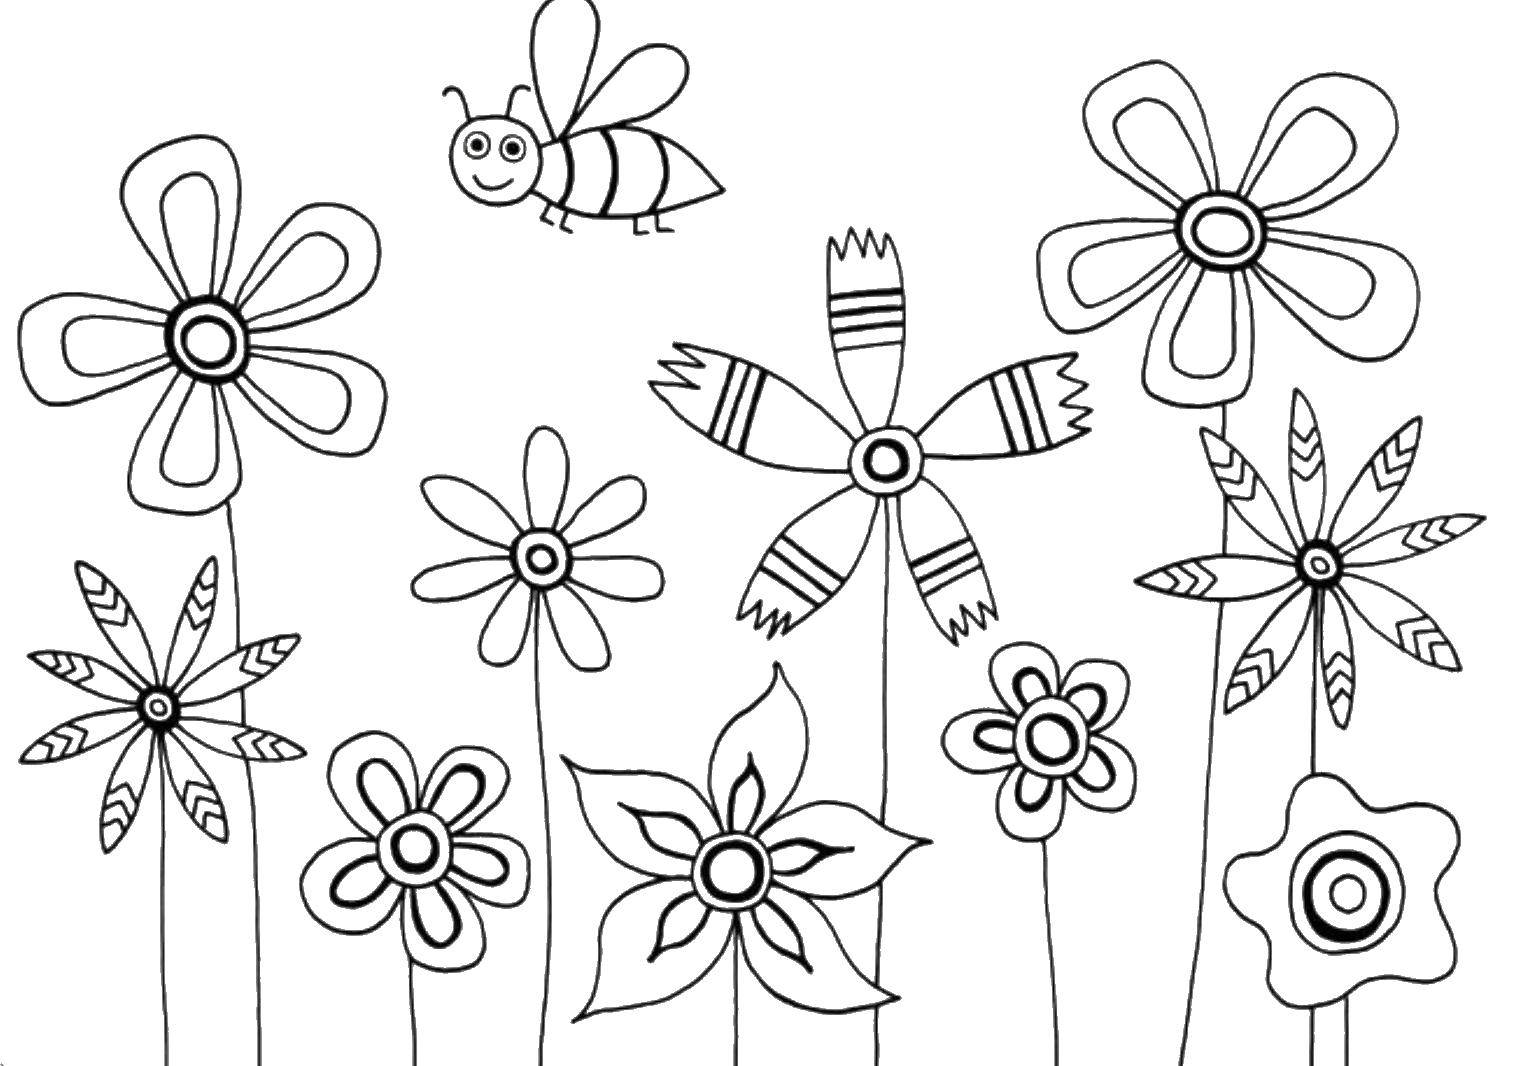 Coloring Different colors and butterfly. Category Flowers. Tags:  flowers, butterfly, flowers.